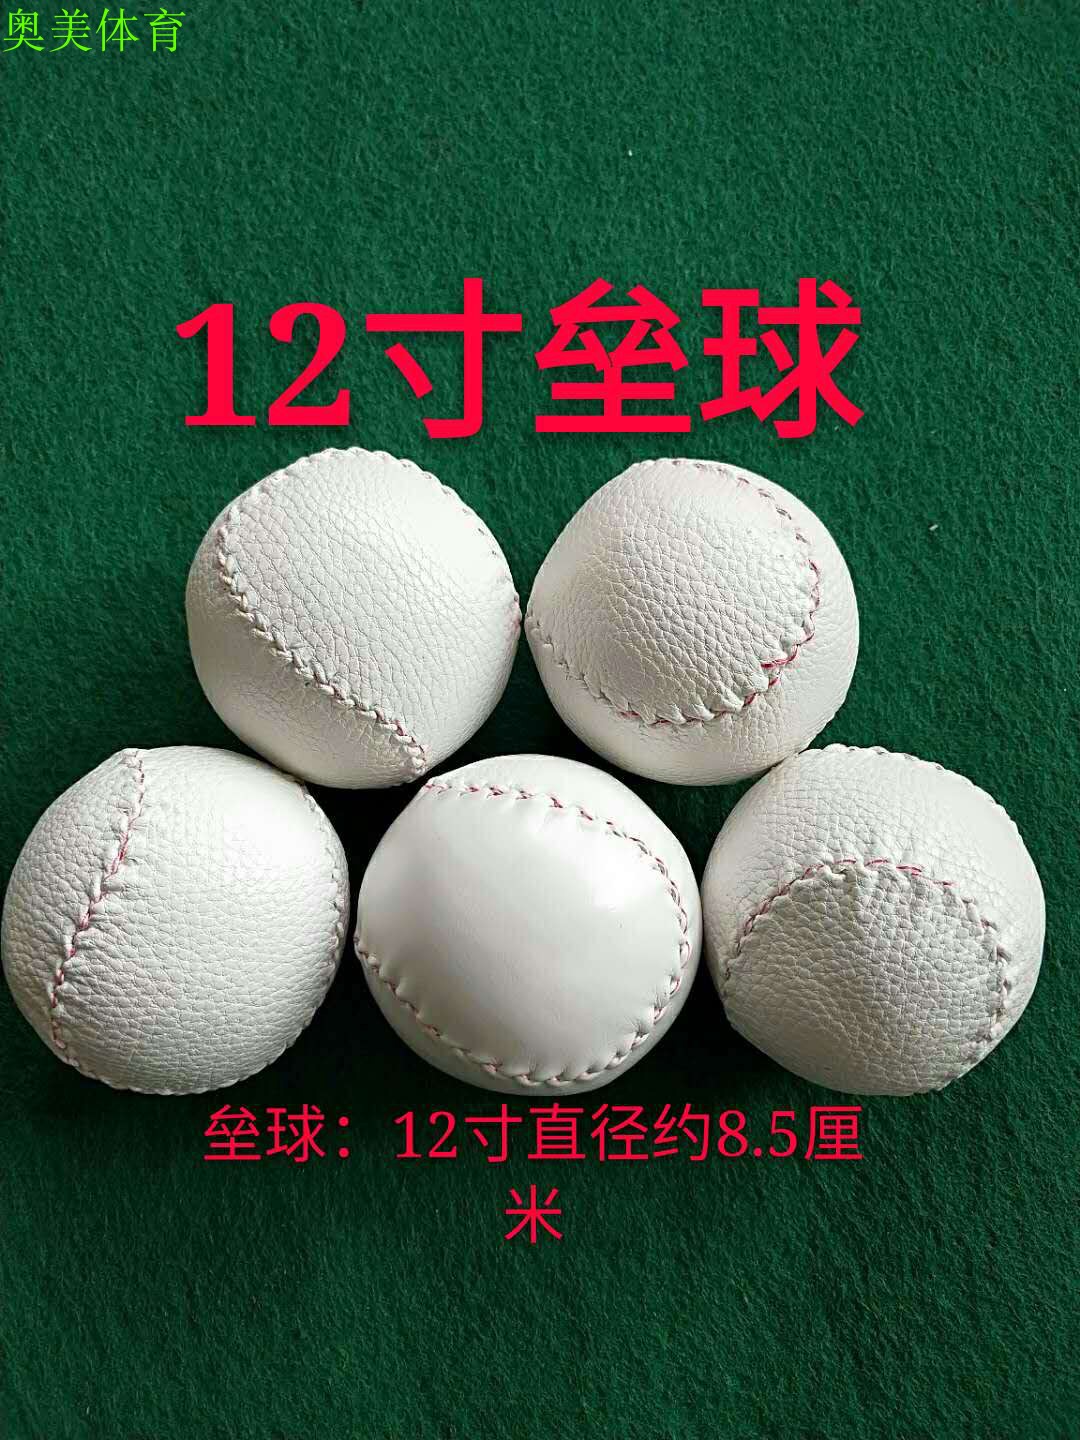 Baoyou 10 inch, 8 inch, 12 inch professional baseball and softball, hand sewn softball, for primary and secondary school students to practice and test